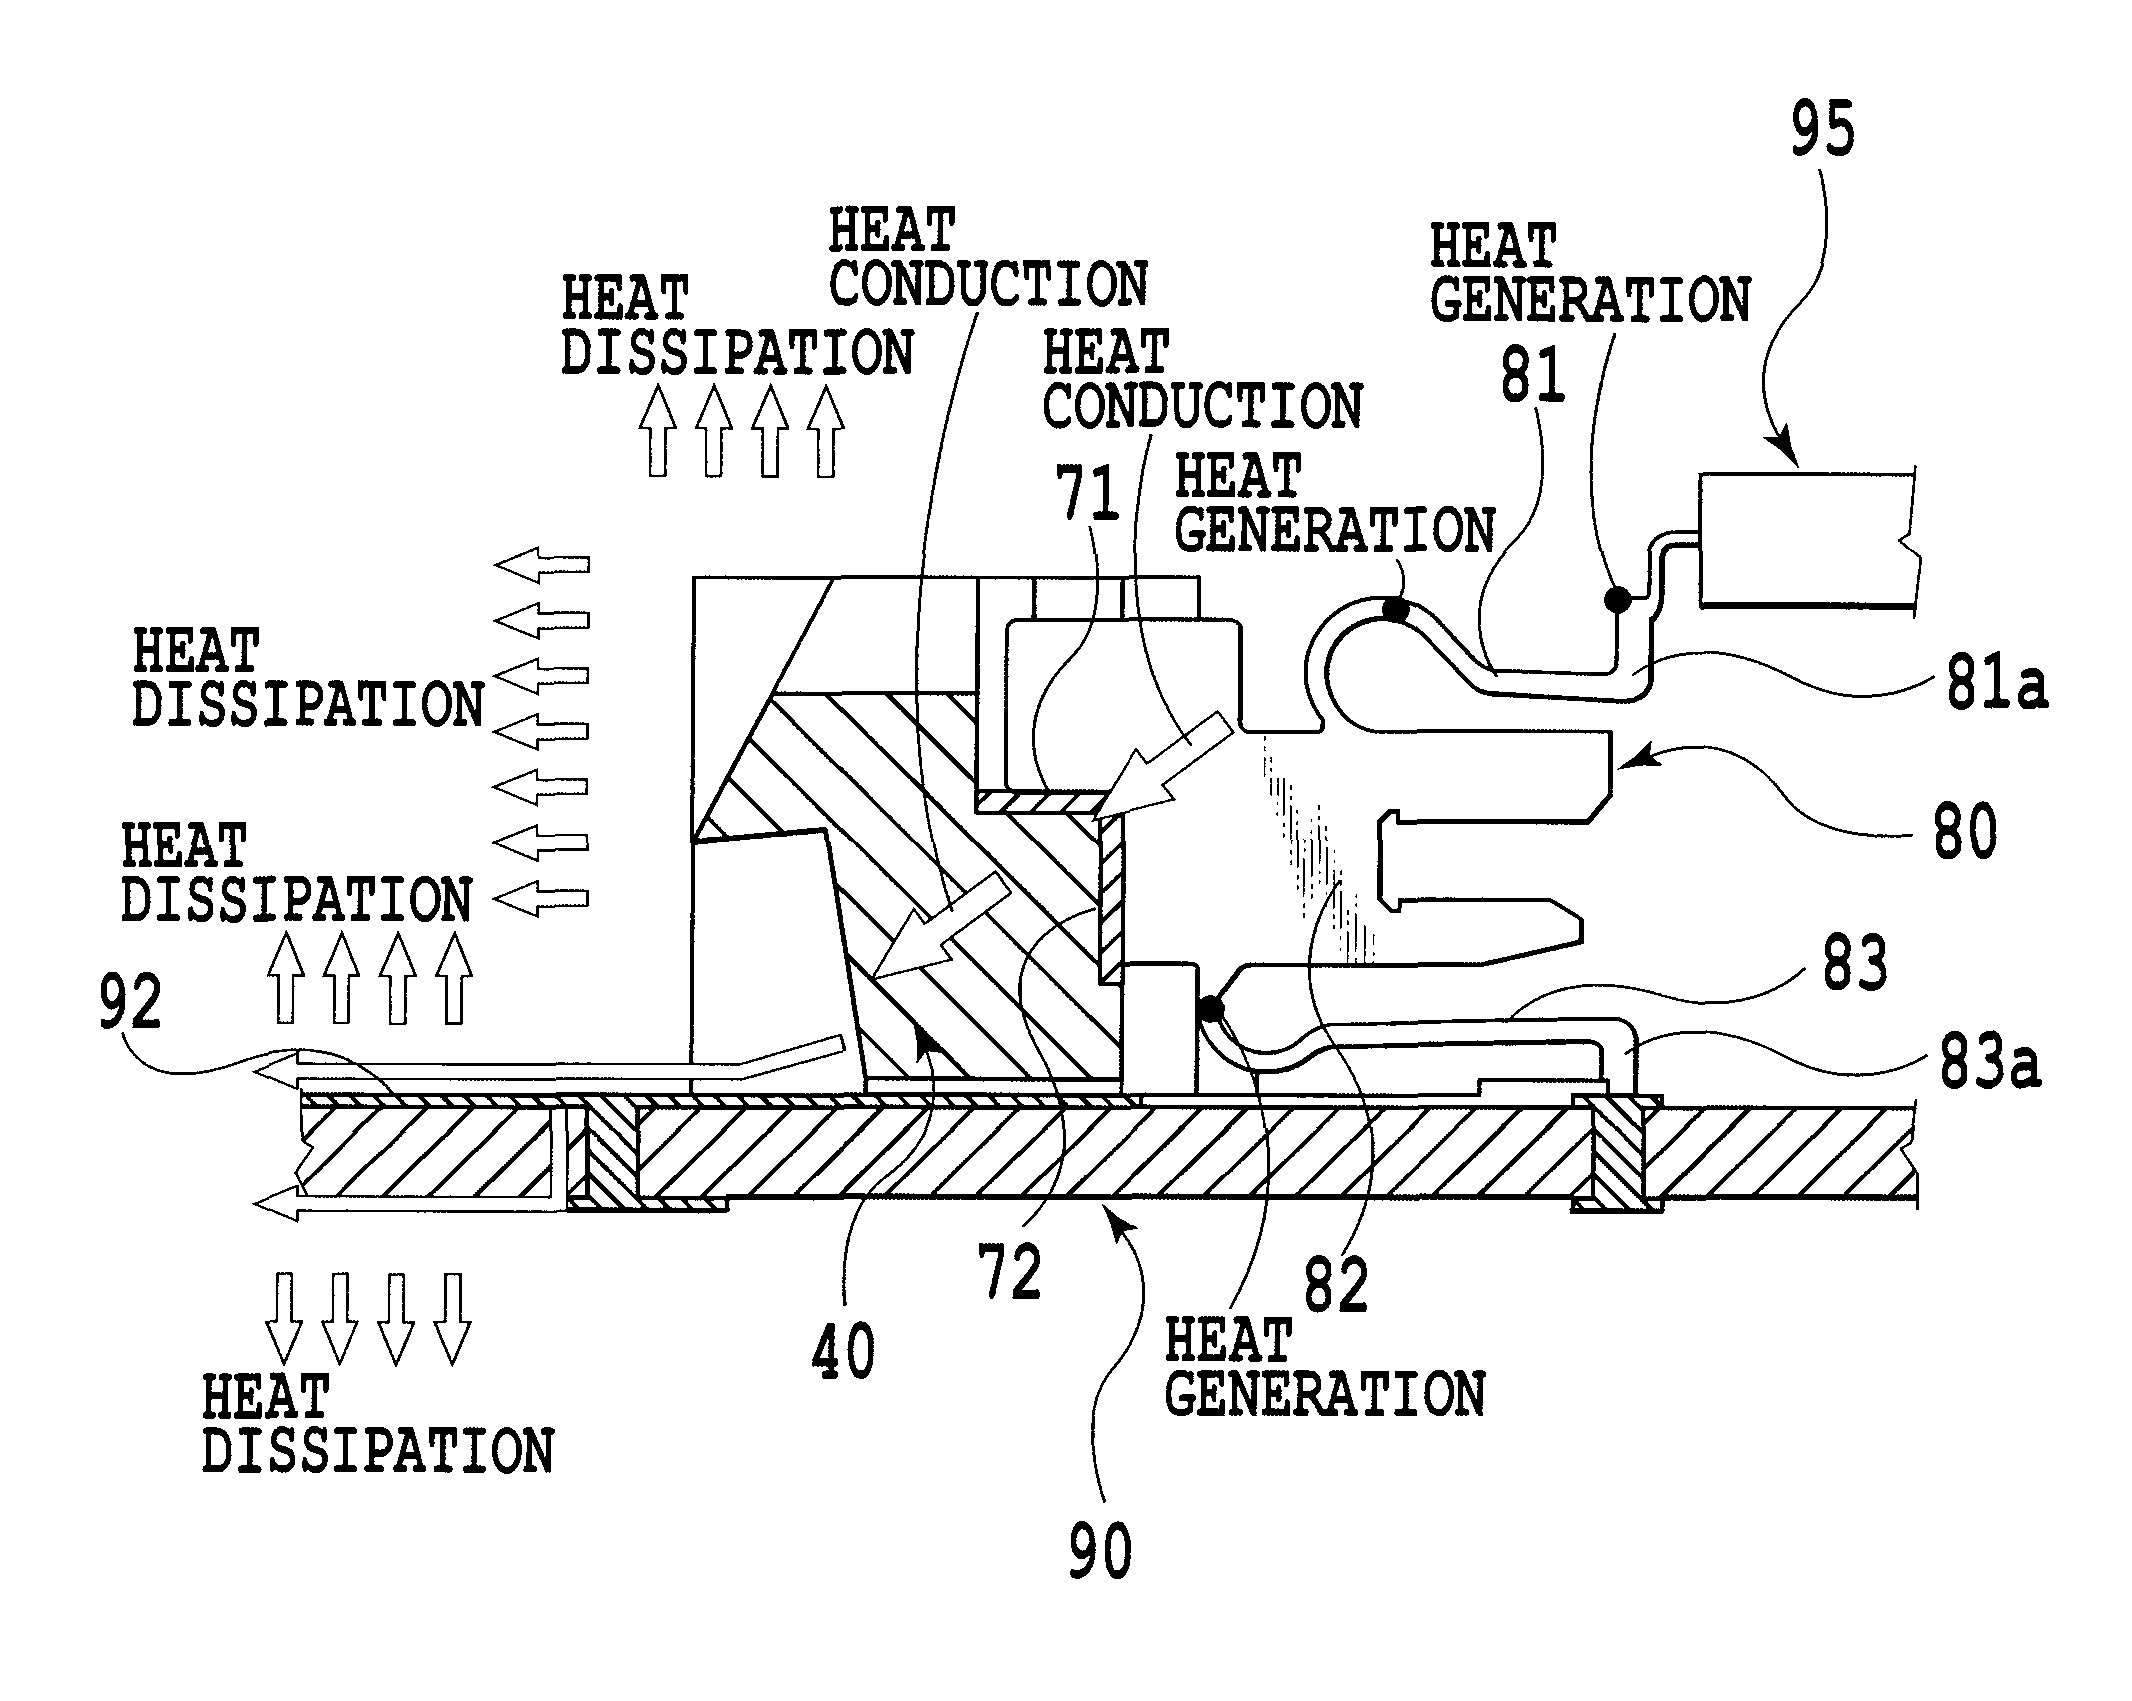 Electric connecting apparatus